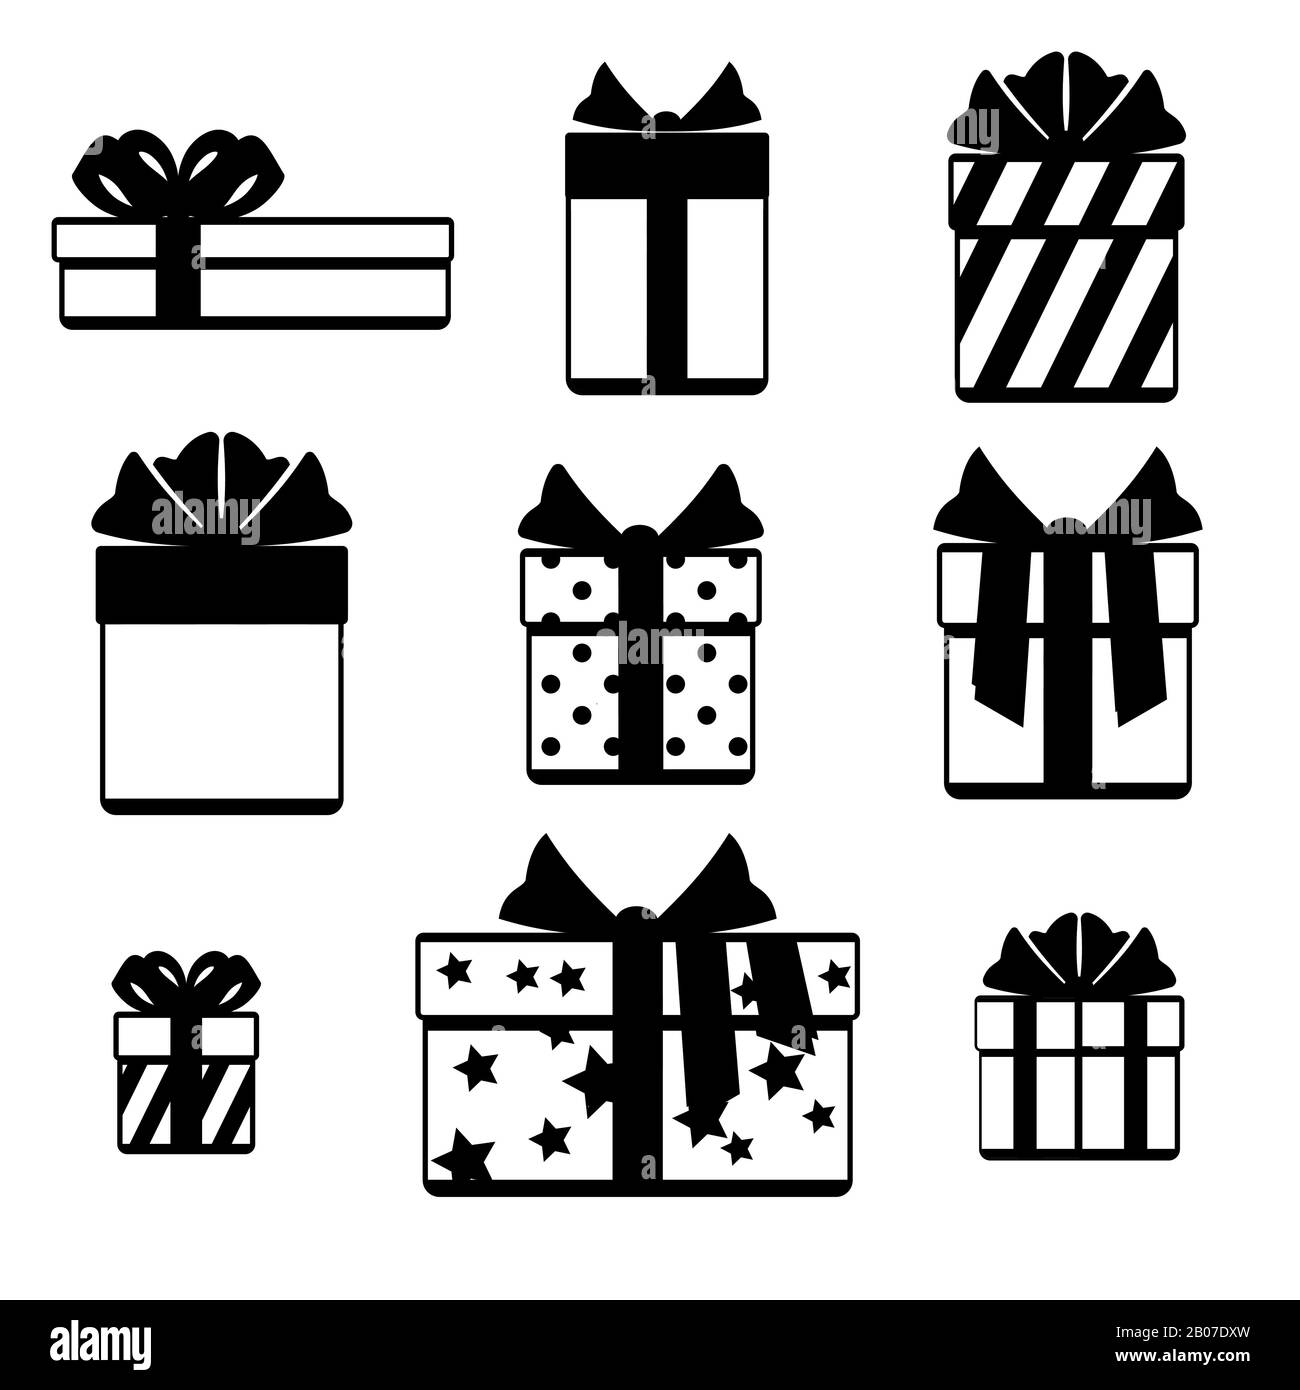 Gift boxes with ribbon bows icons set isolated over white. Gift icon with bow ribbon. Vector illustration Stock Vector